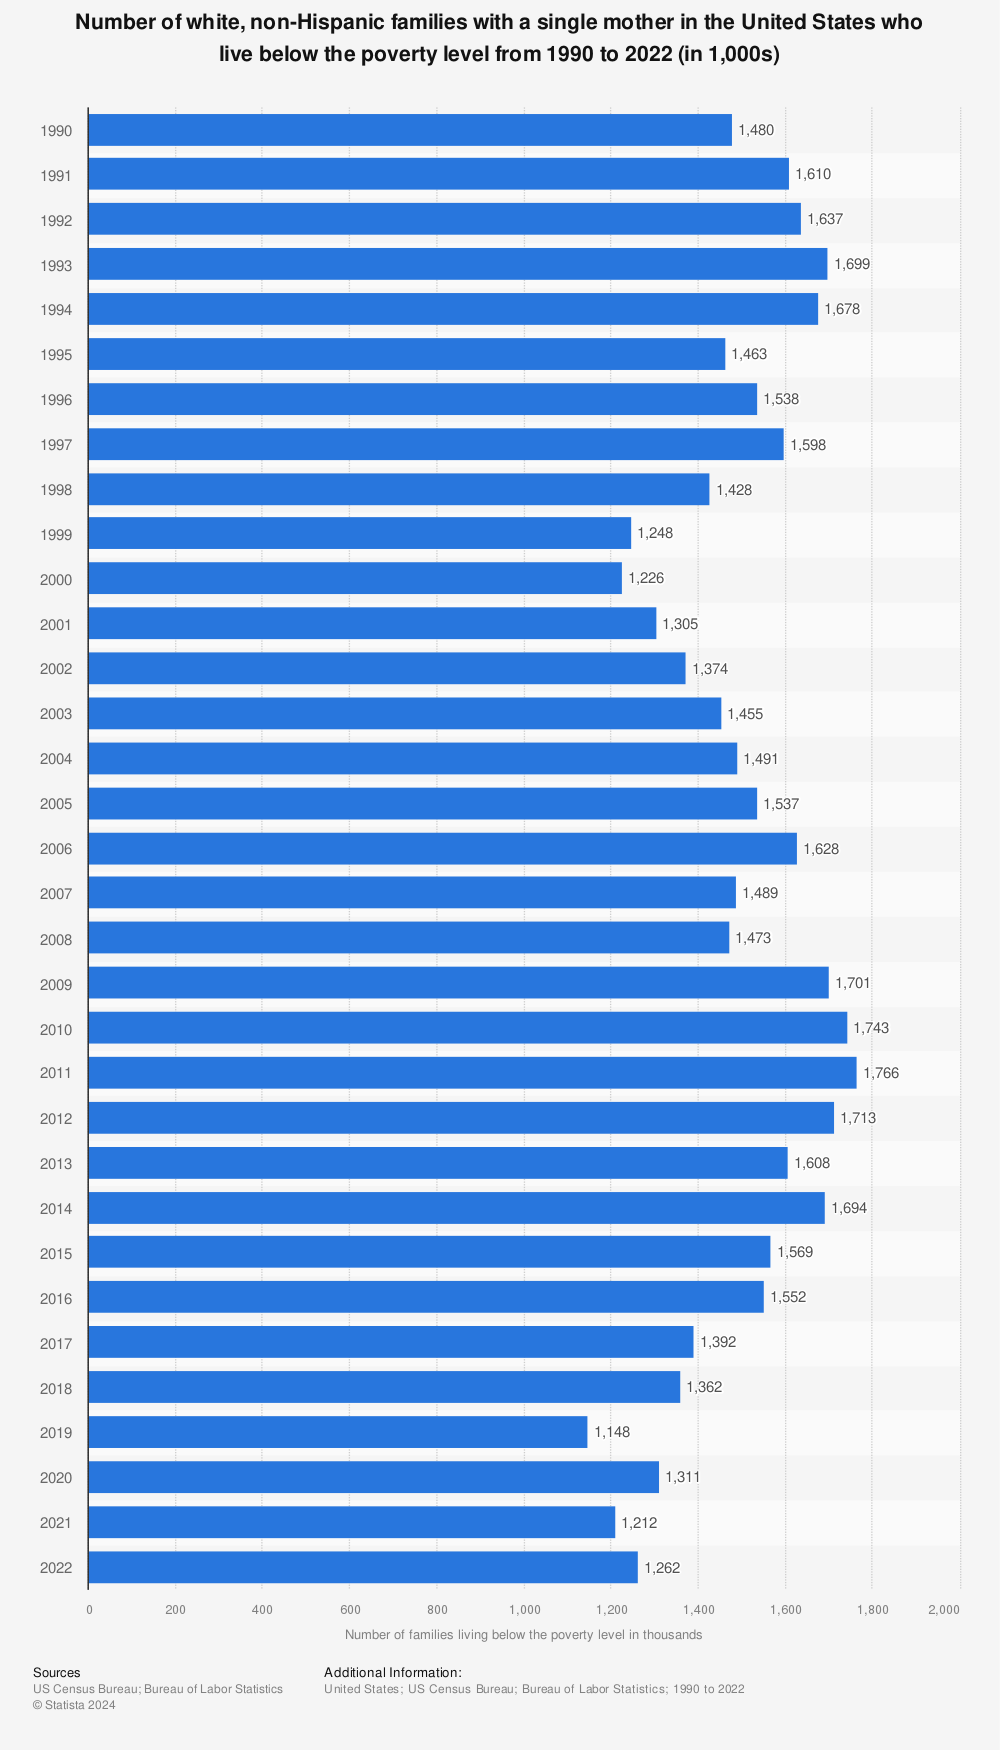 Statistic: Number of white, non-Hispanic families with a single mother in the U.S. who live below the poverty level from 1990 to 2020 (in 1,000s) | Statista